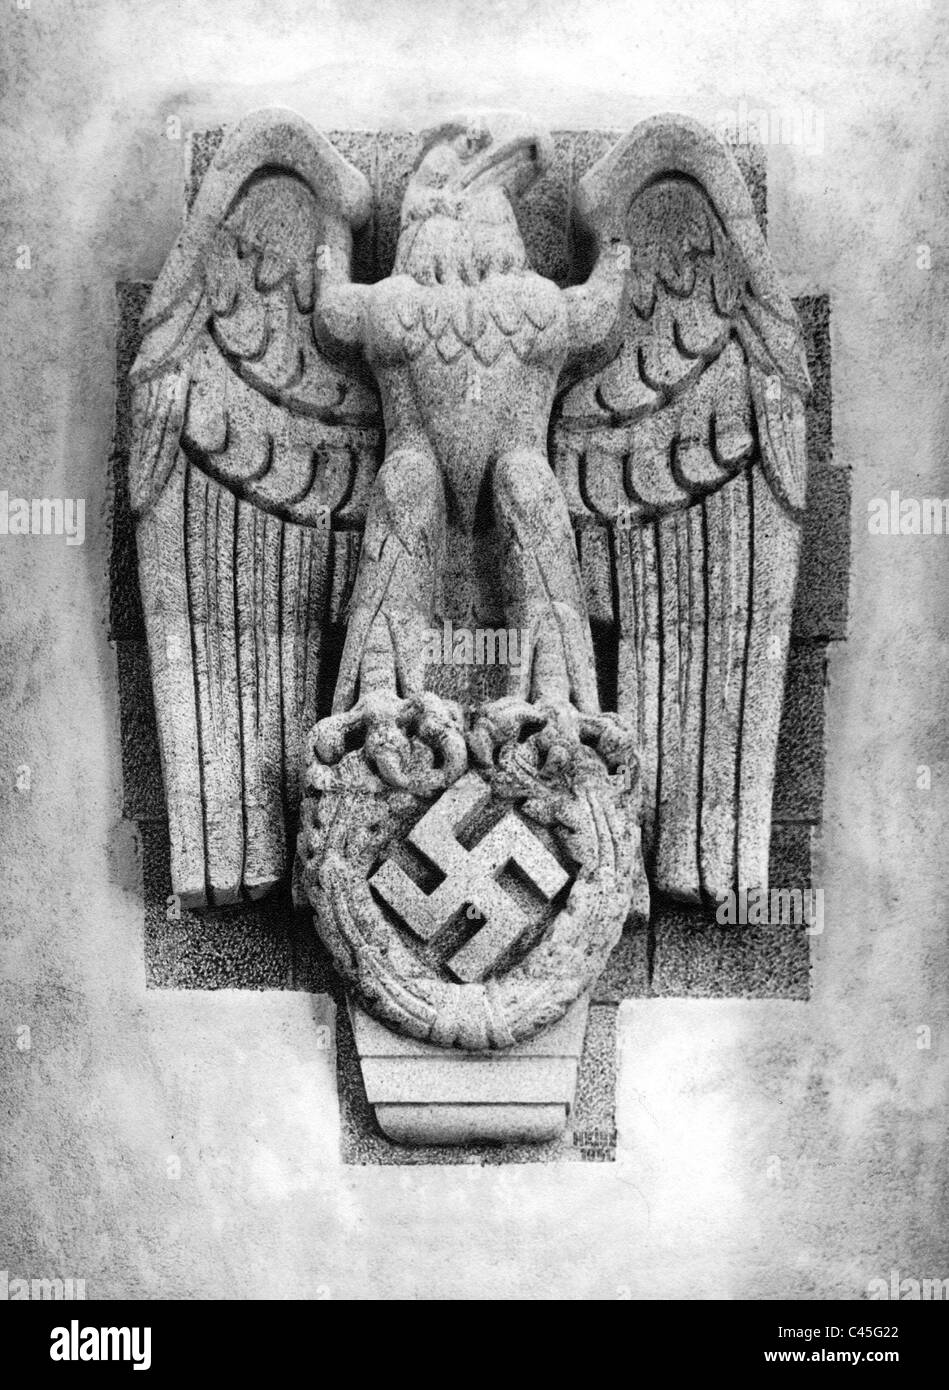 Reich Eagle form the Third Reich Stock Photo